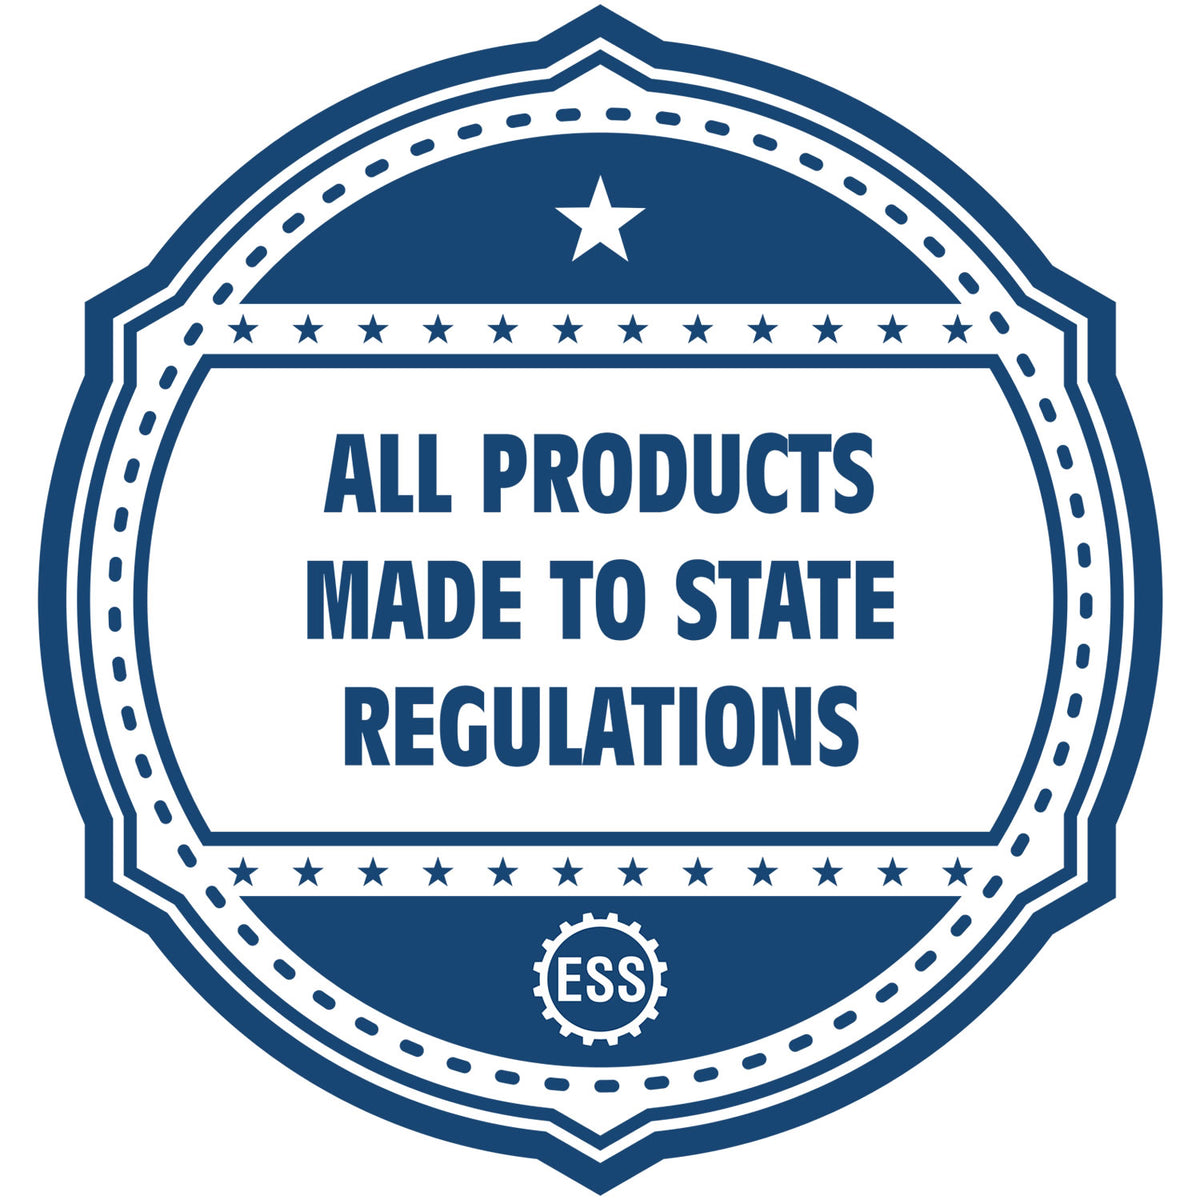 A blue icon or badge for the Self-Inking New Mexico Geologist Stamp showing that this product is made in compliance with state regulations.